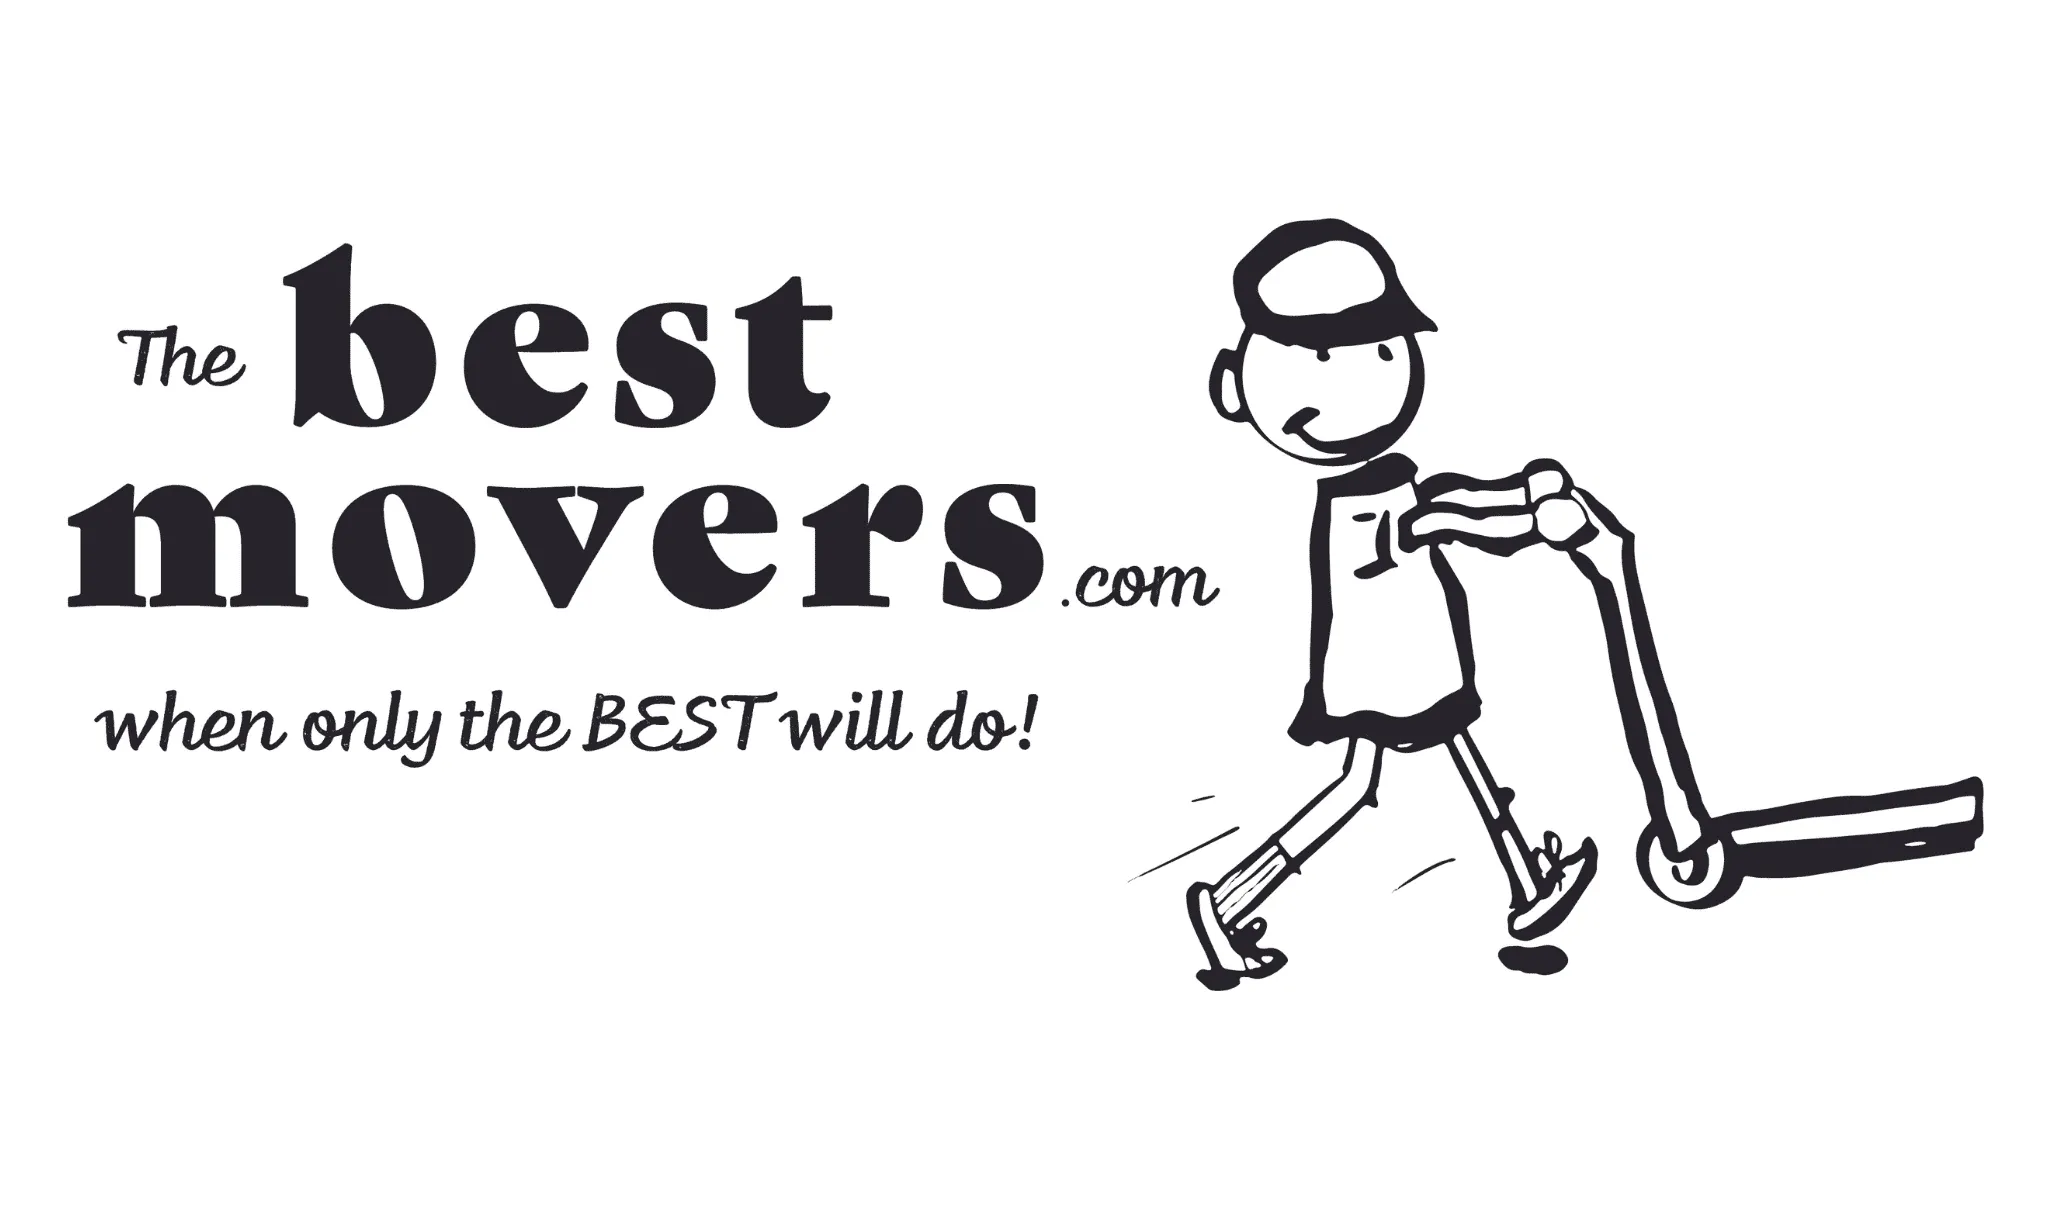 The Best Movers logo